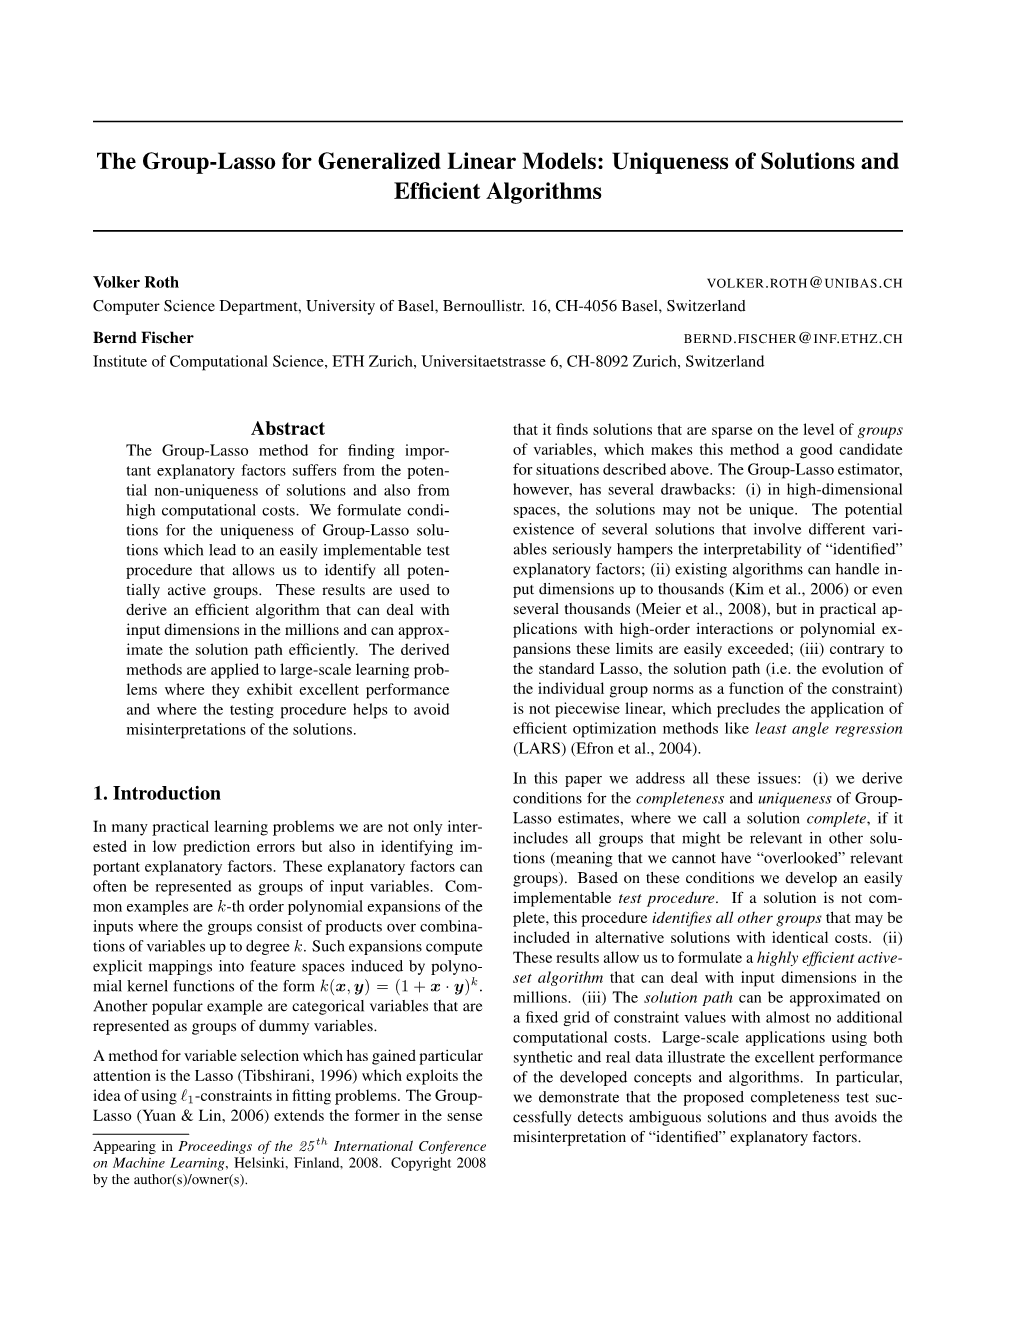 The Group-Lasso for Generalized Linear Models: Uniqueness of Solutions and Efﬁcient Algorithms